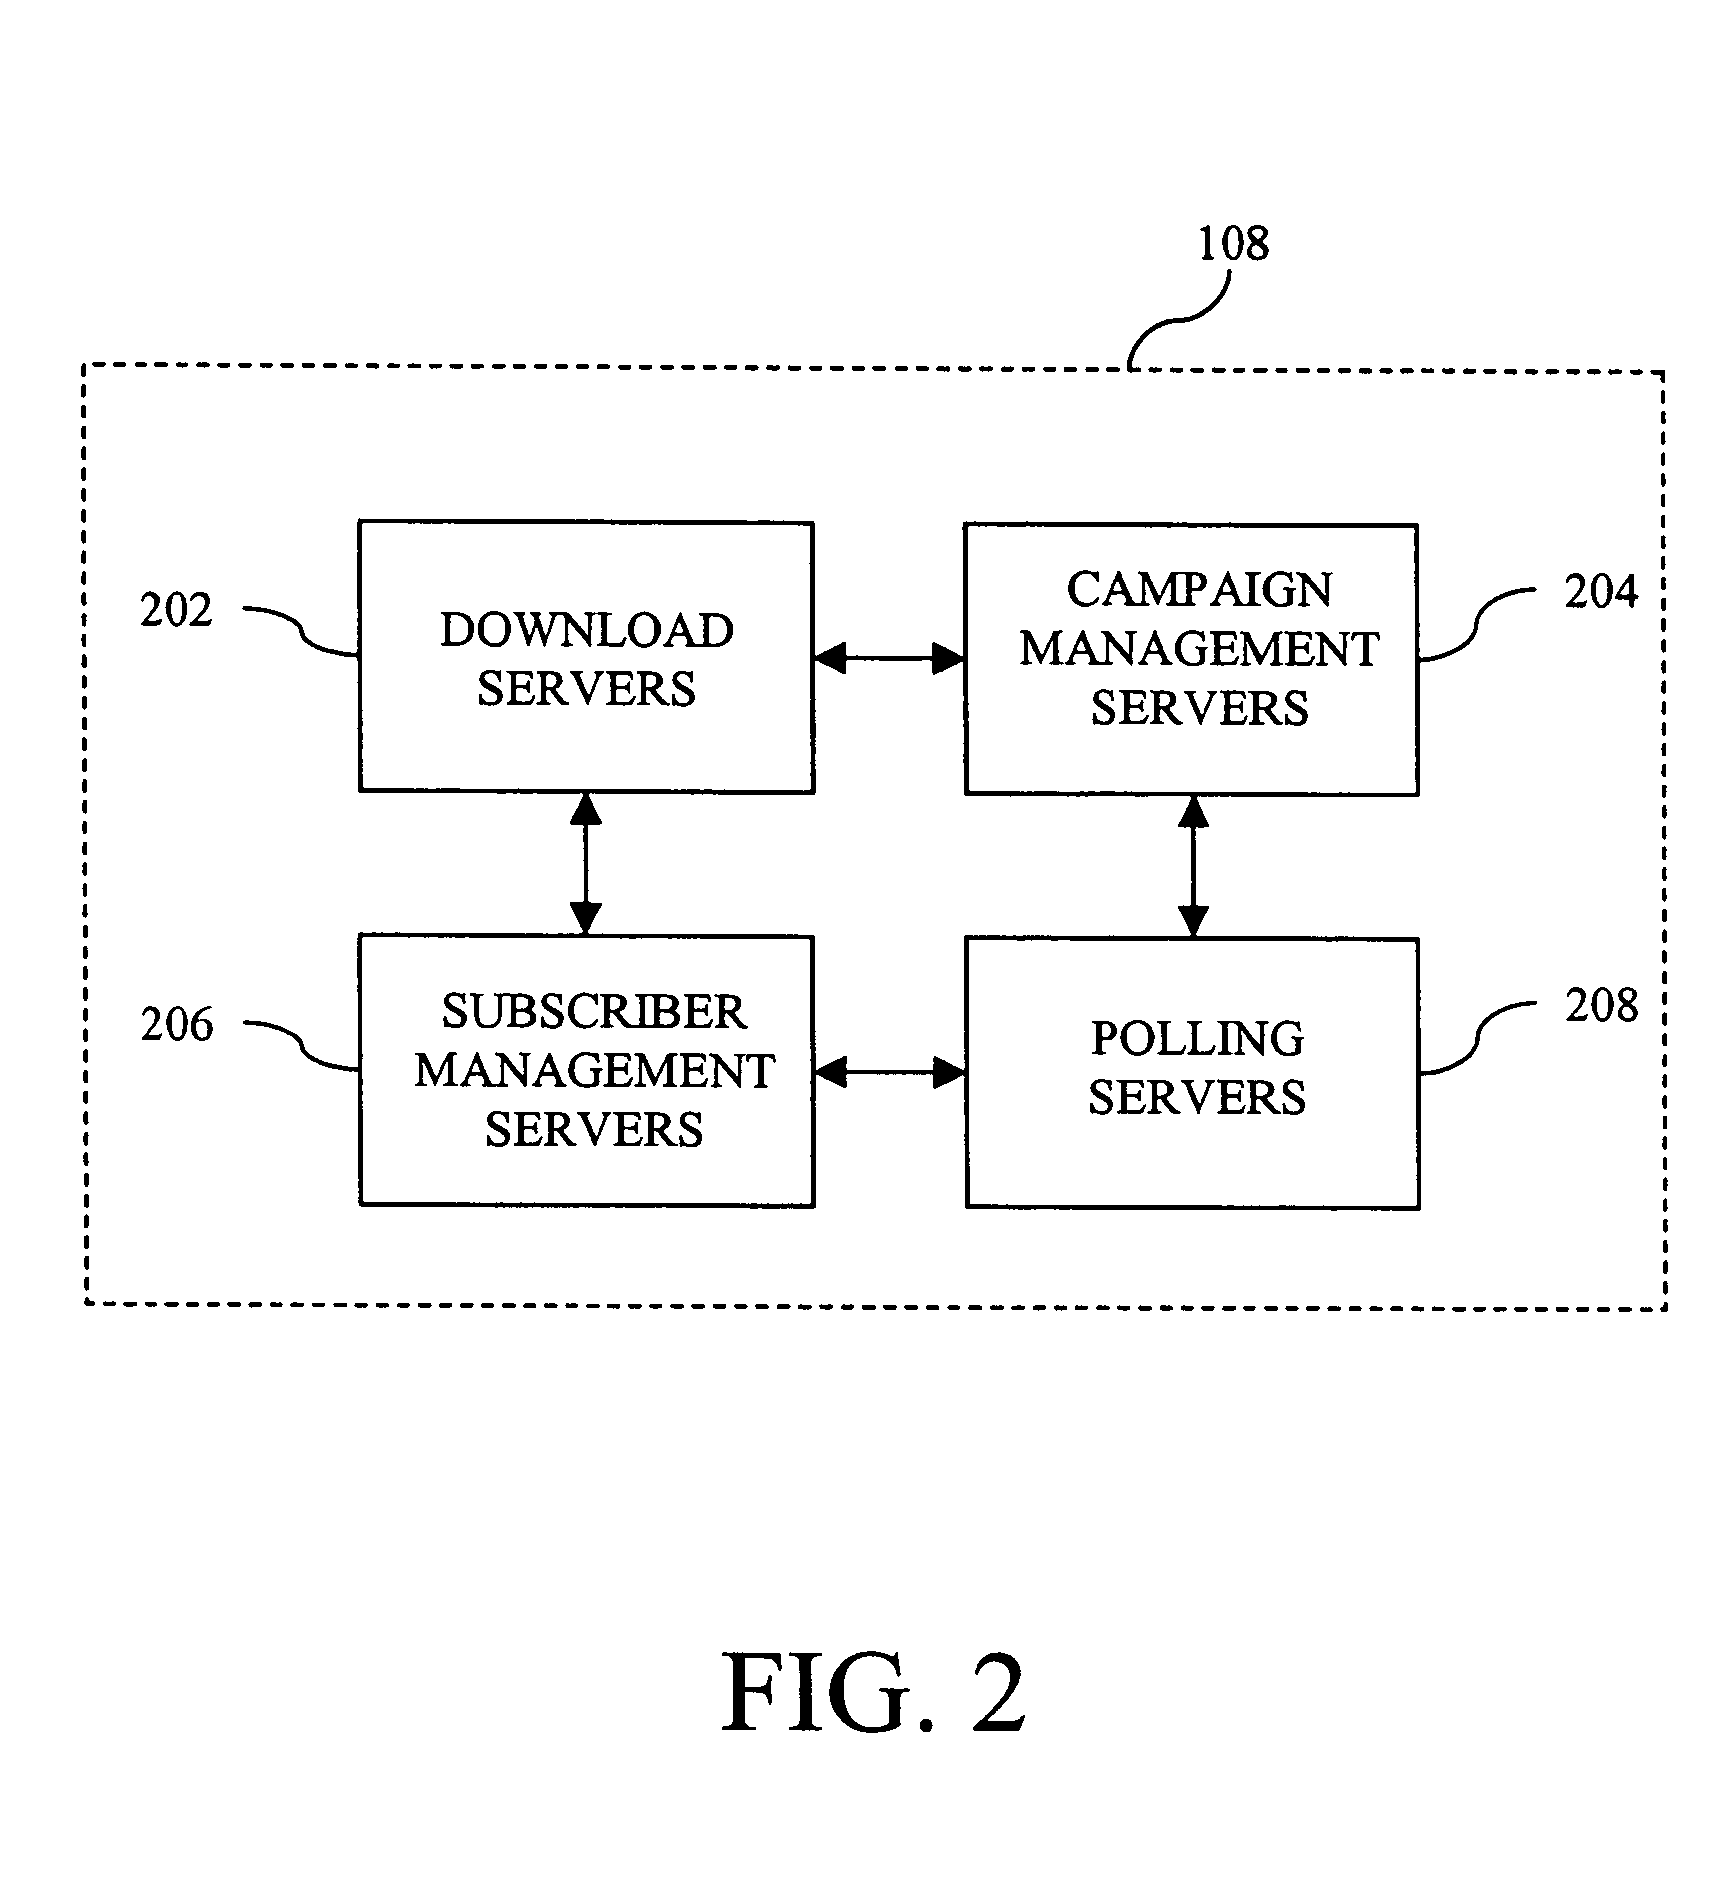 Systems and methods for producing, managing, delivering, retrieving, and/or tracking permission based communications